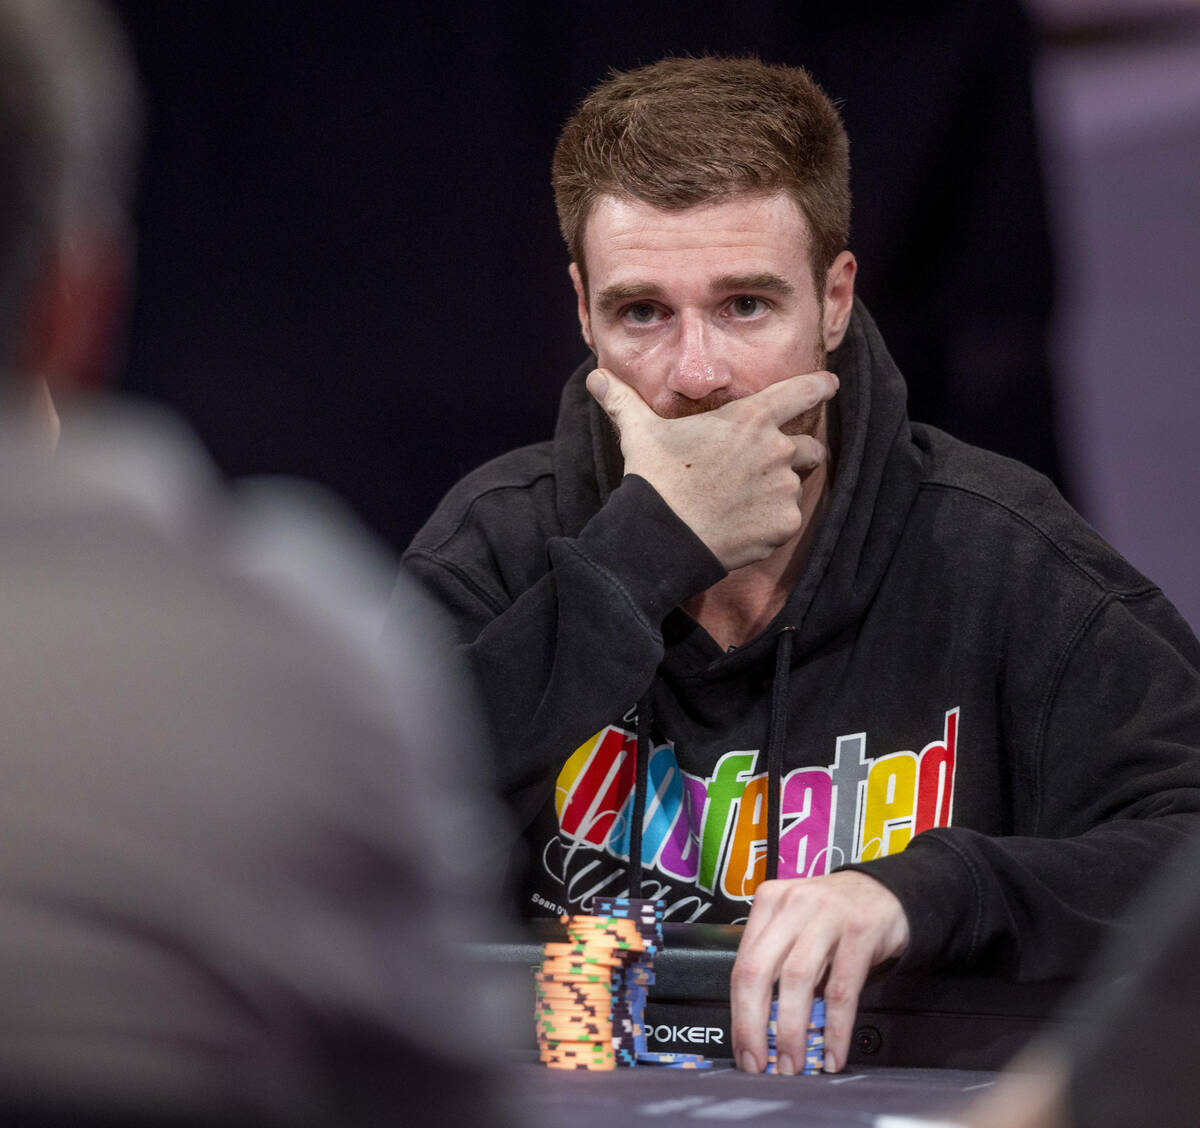 Player Adrian Attenborough considers his hand during final table play at the WSOP Main Event wi ...